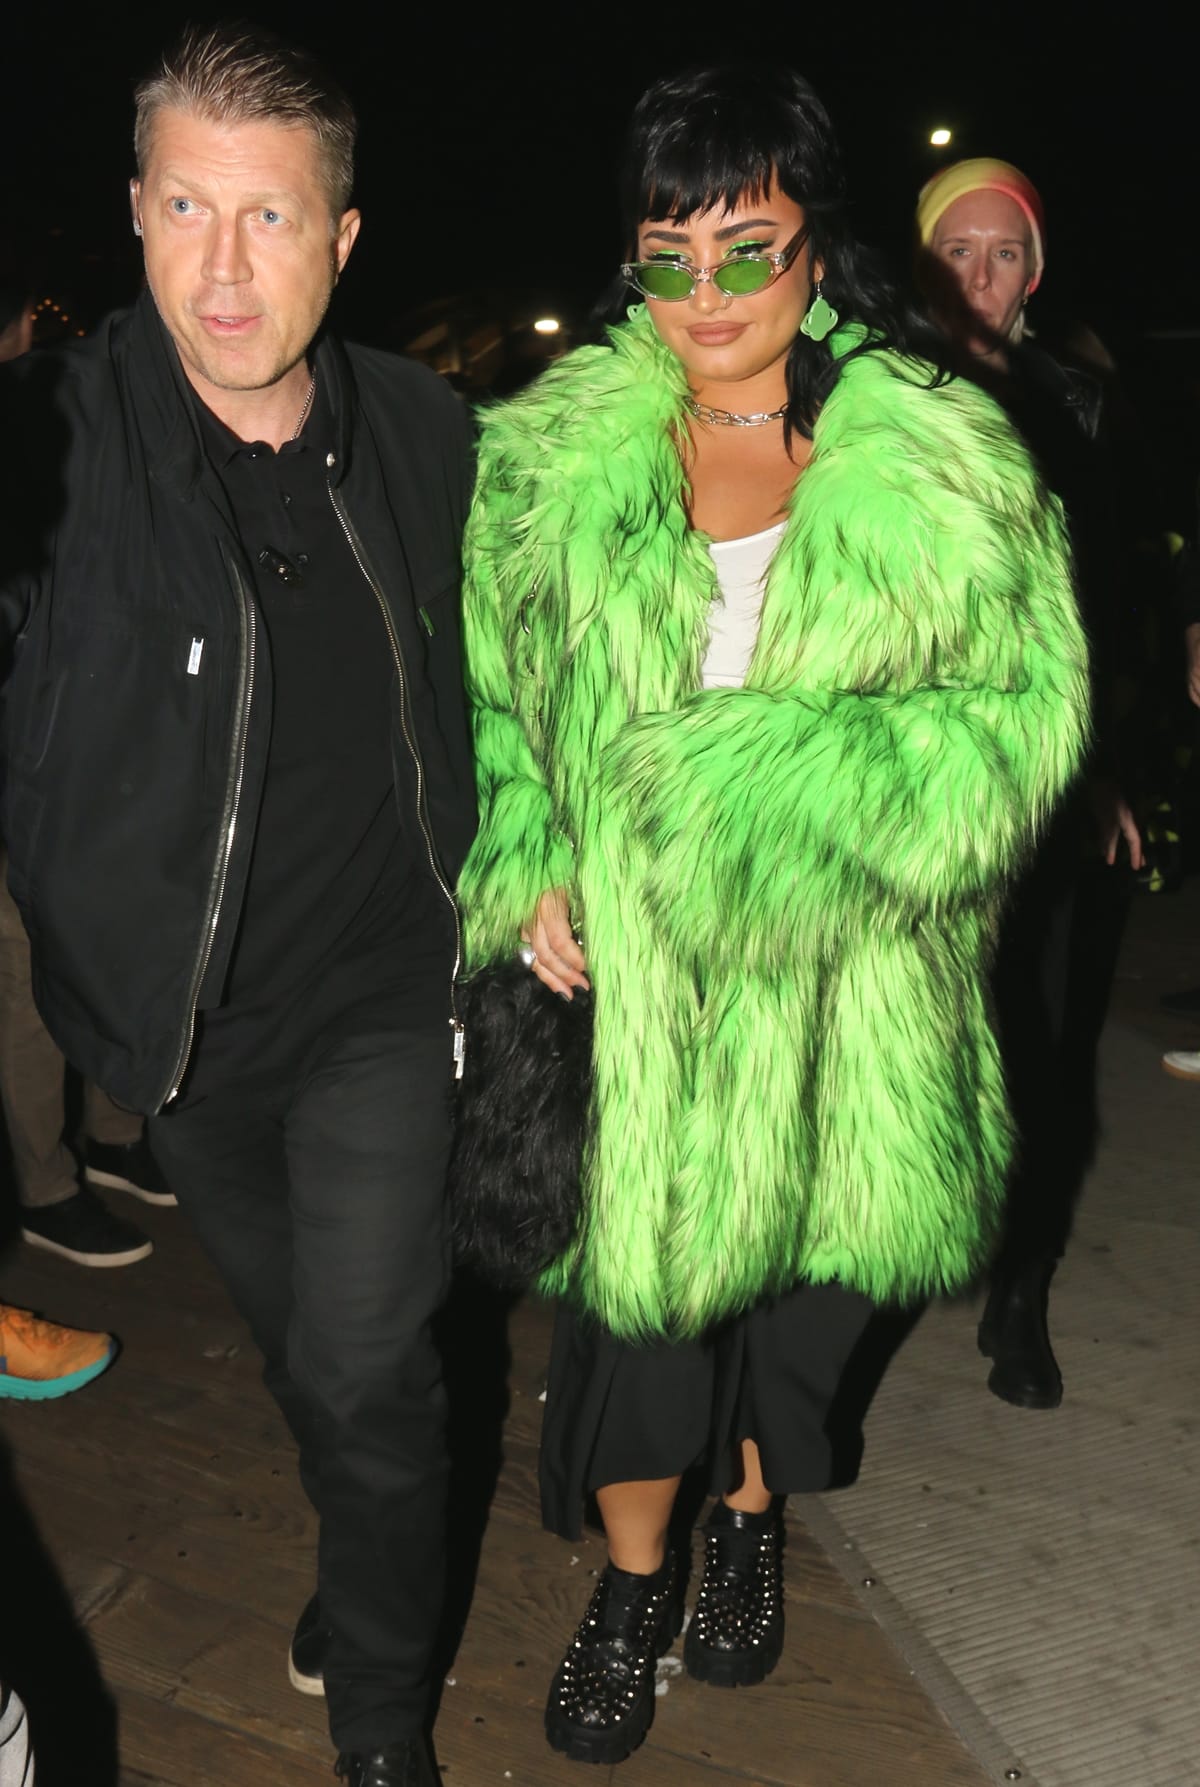 Demi Lovato in a bright green faux-fur coat shows up for Paris Hilton and Carter Reum‘s after-party